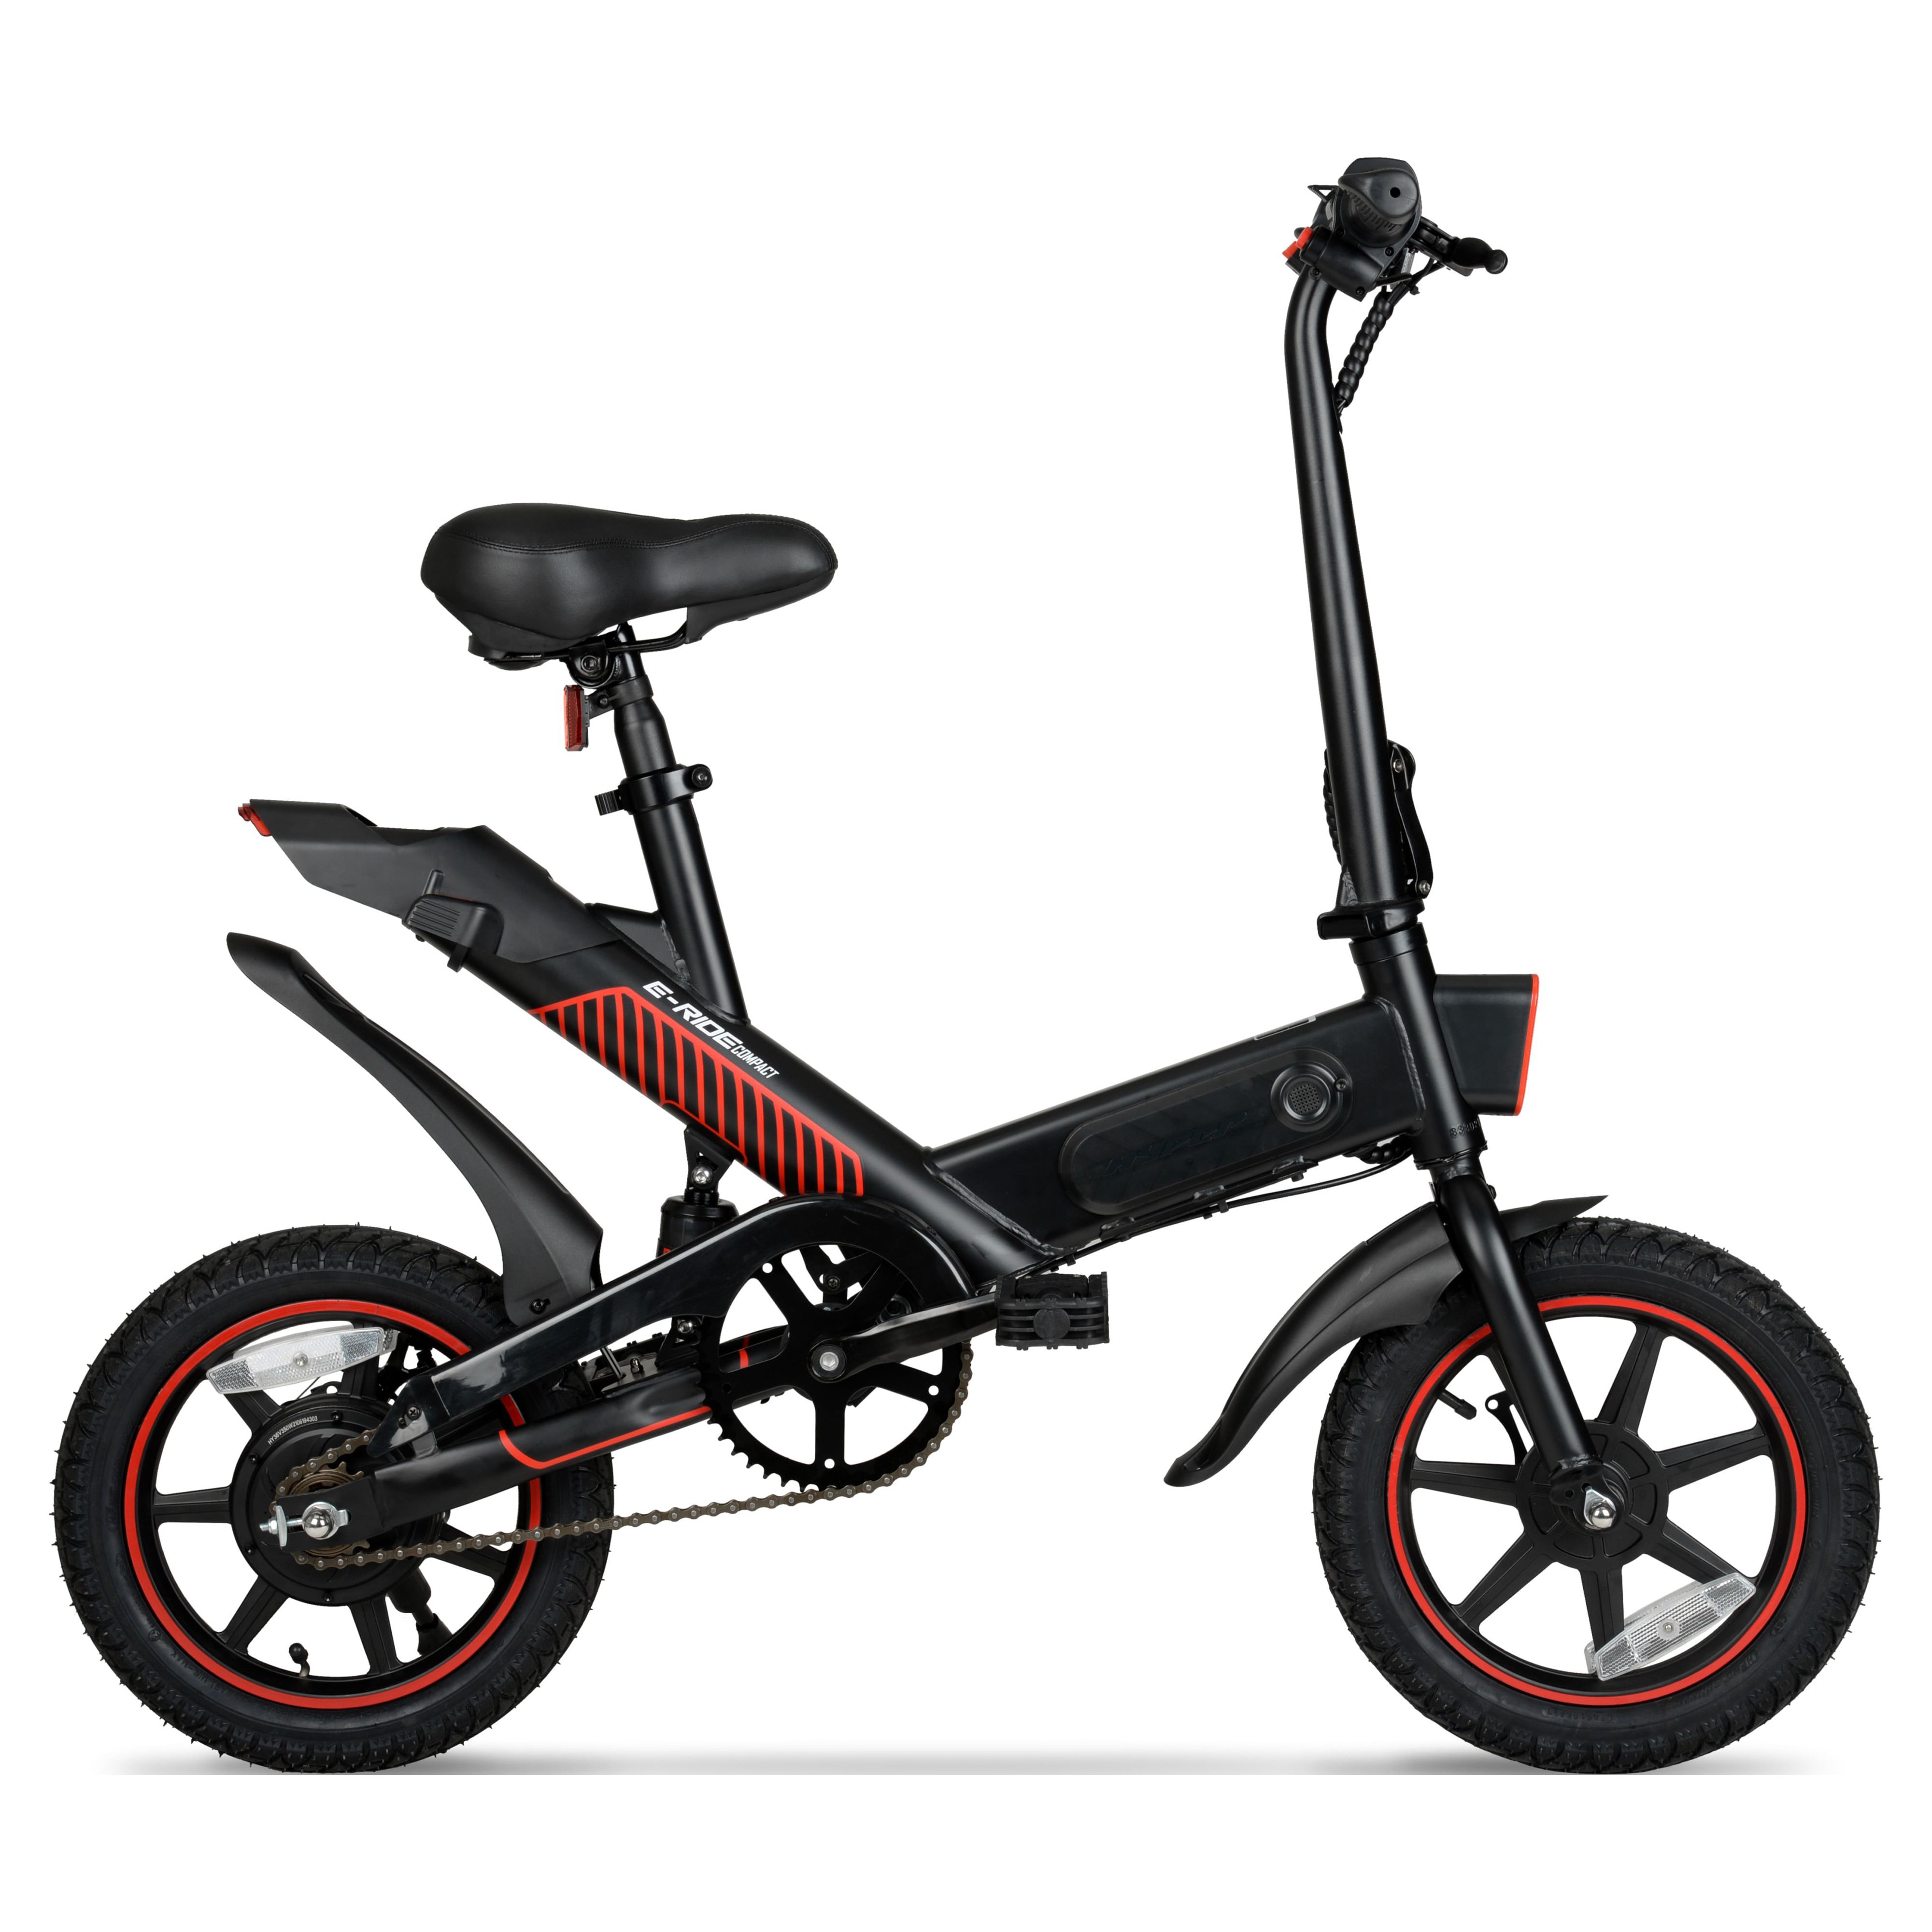 Hyper Bicycles 14" 36V Foldable Compact Electric Bike w/Throttle, 350W Motor, Recommended Ages 14 years and up - image 5 of 20